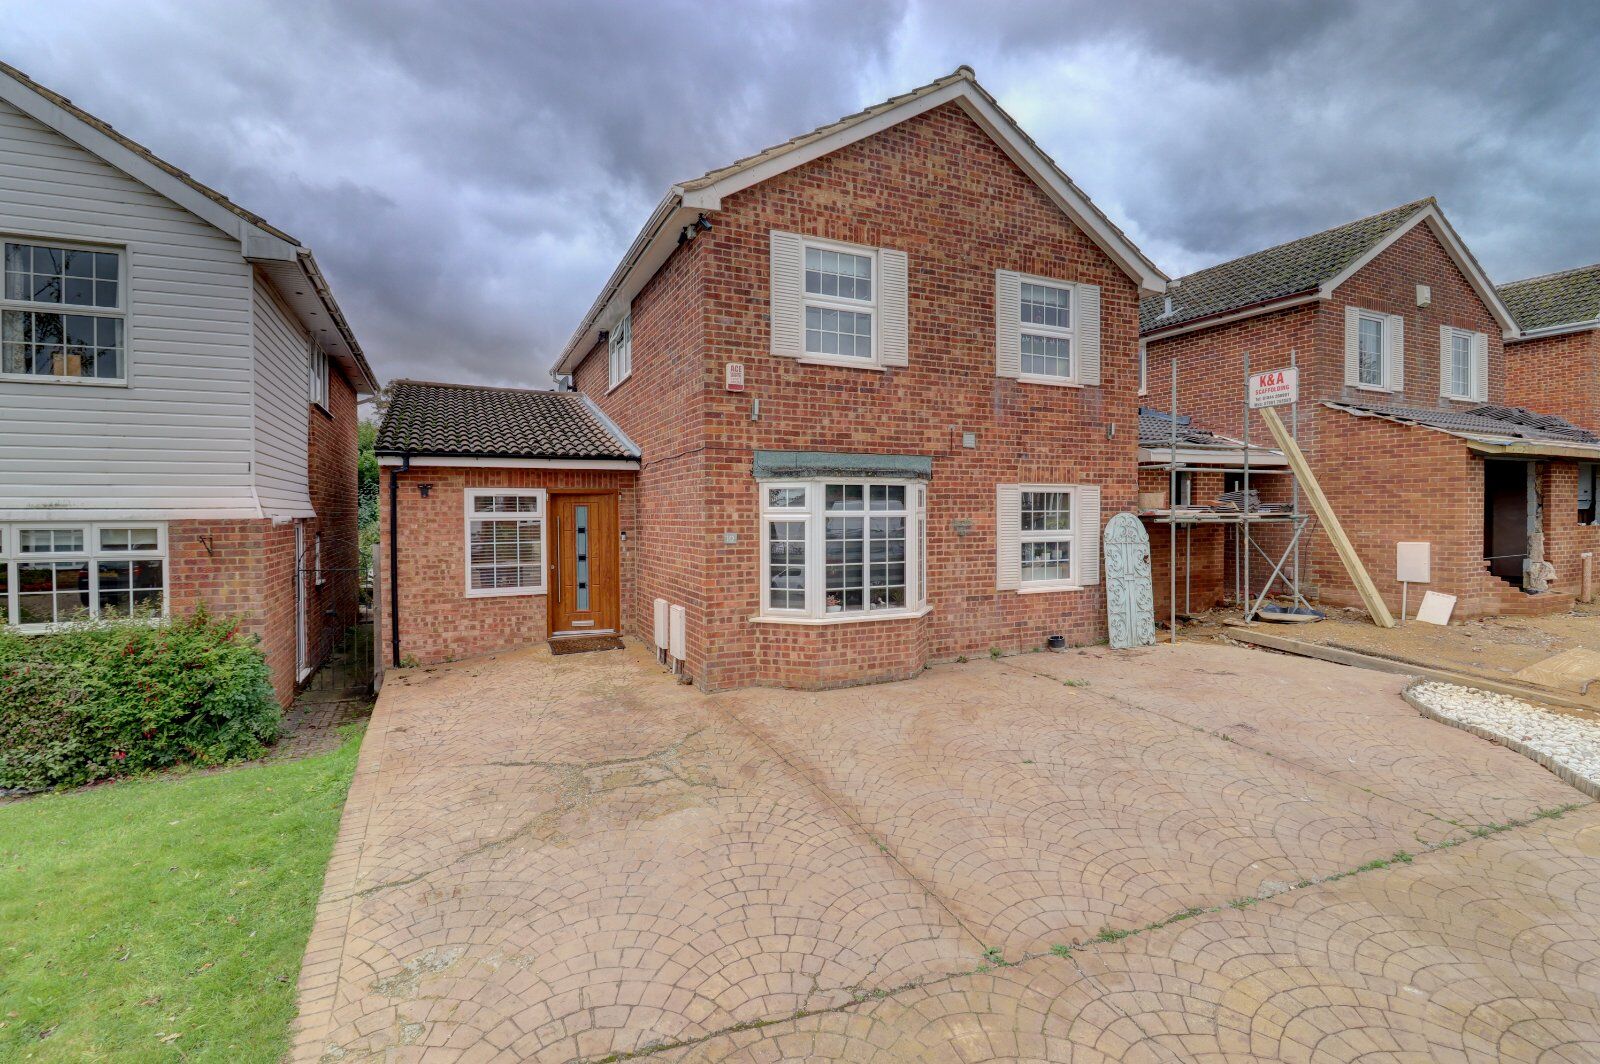 4 bedroom detached house for sale Narrow Lane, Downley, HP13, main image